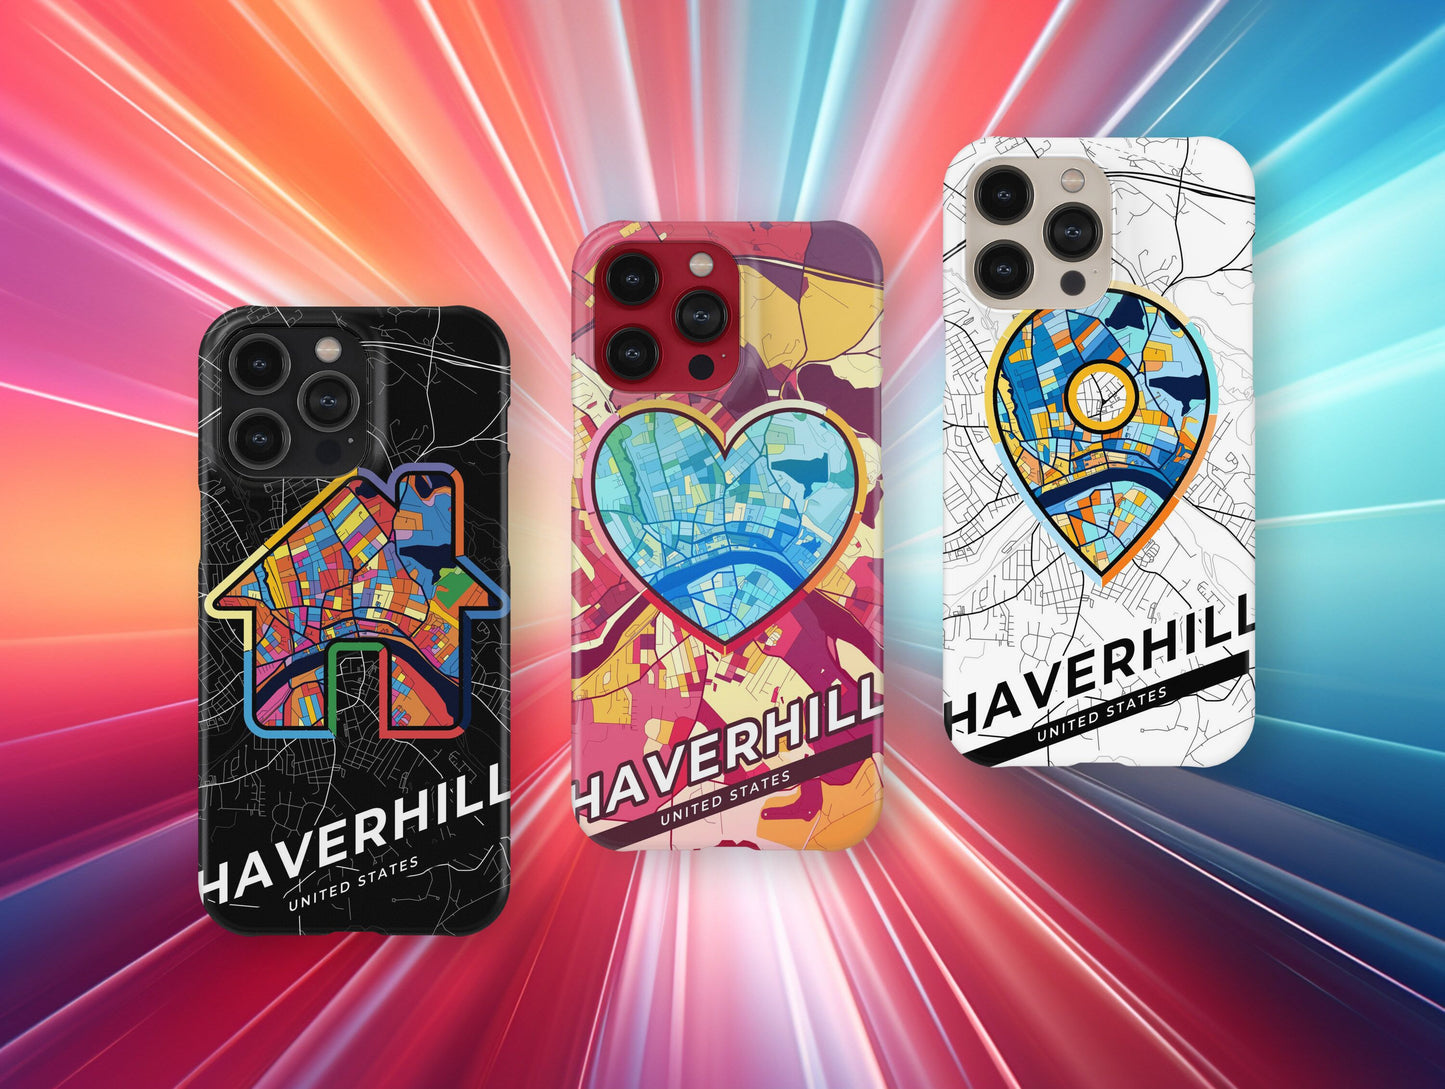 Haverhill Massachusetts slim phone case with colorful icon. Birthday, wedding or housewarming gift. Couple match cases.